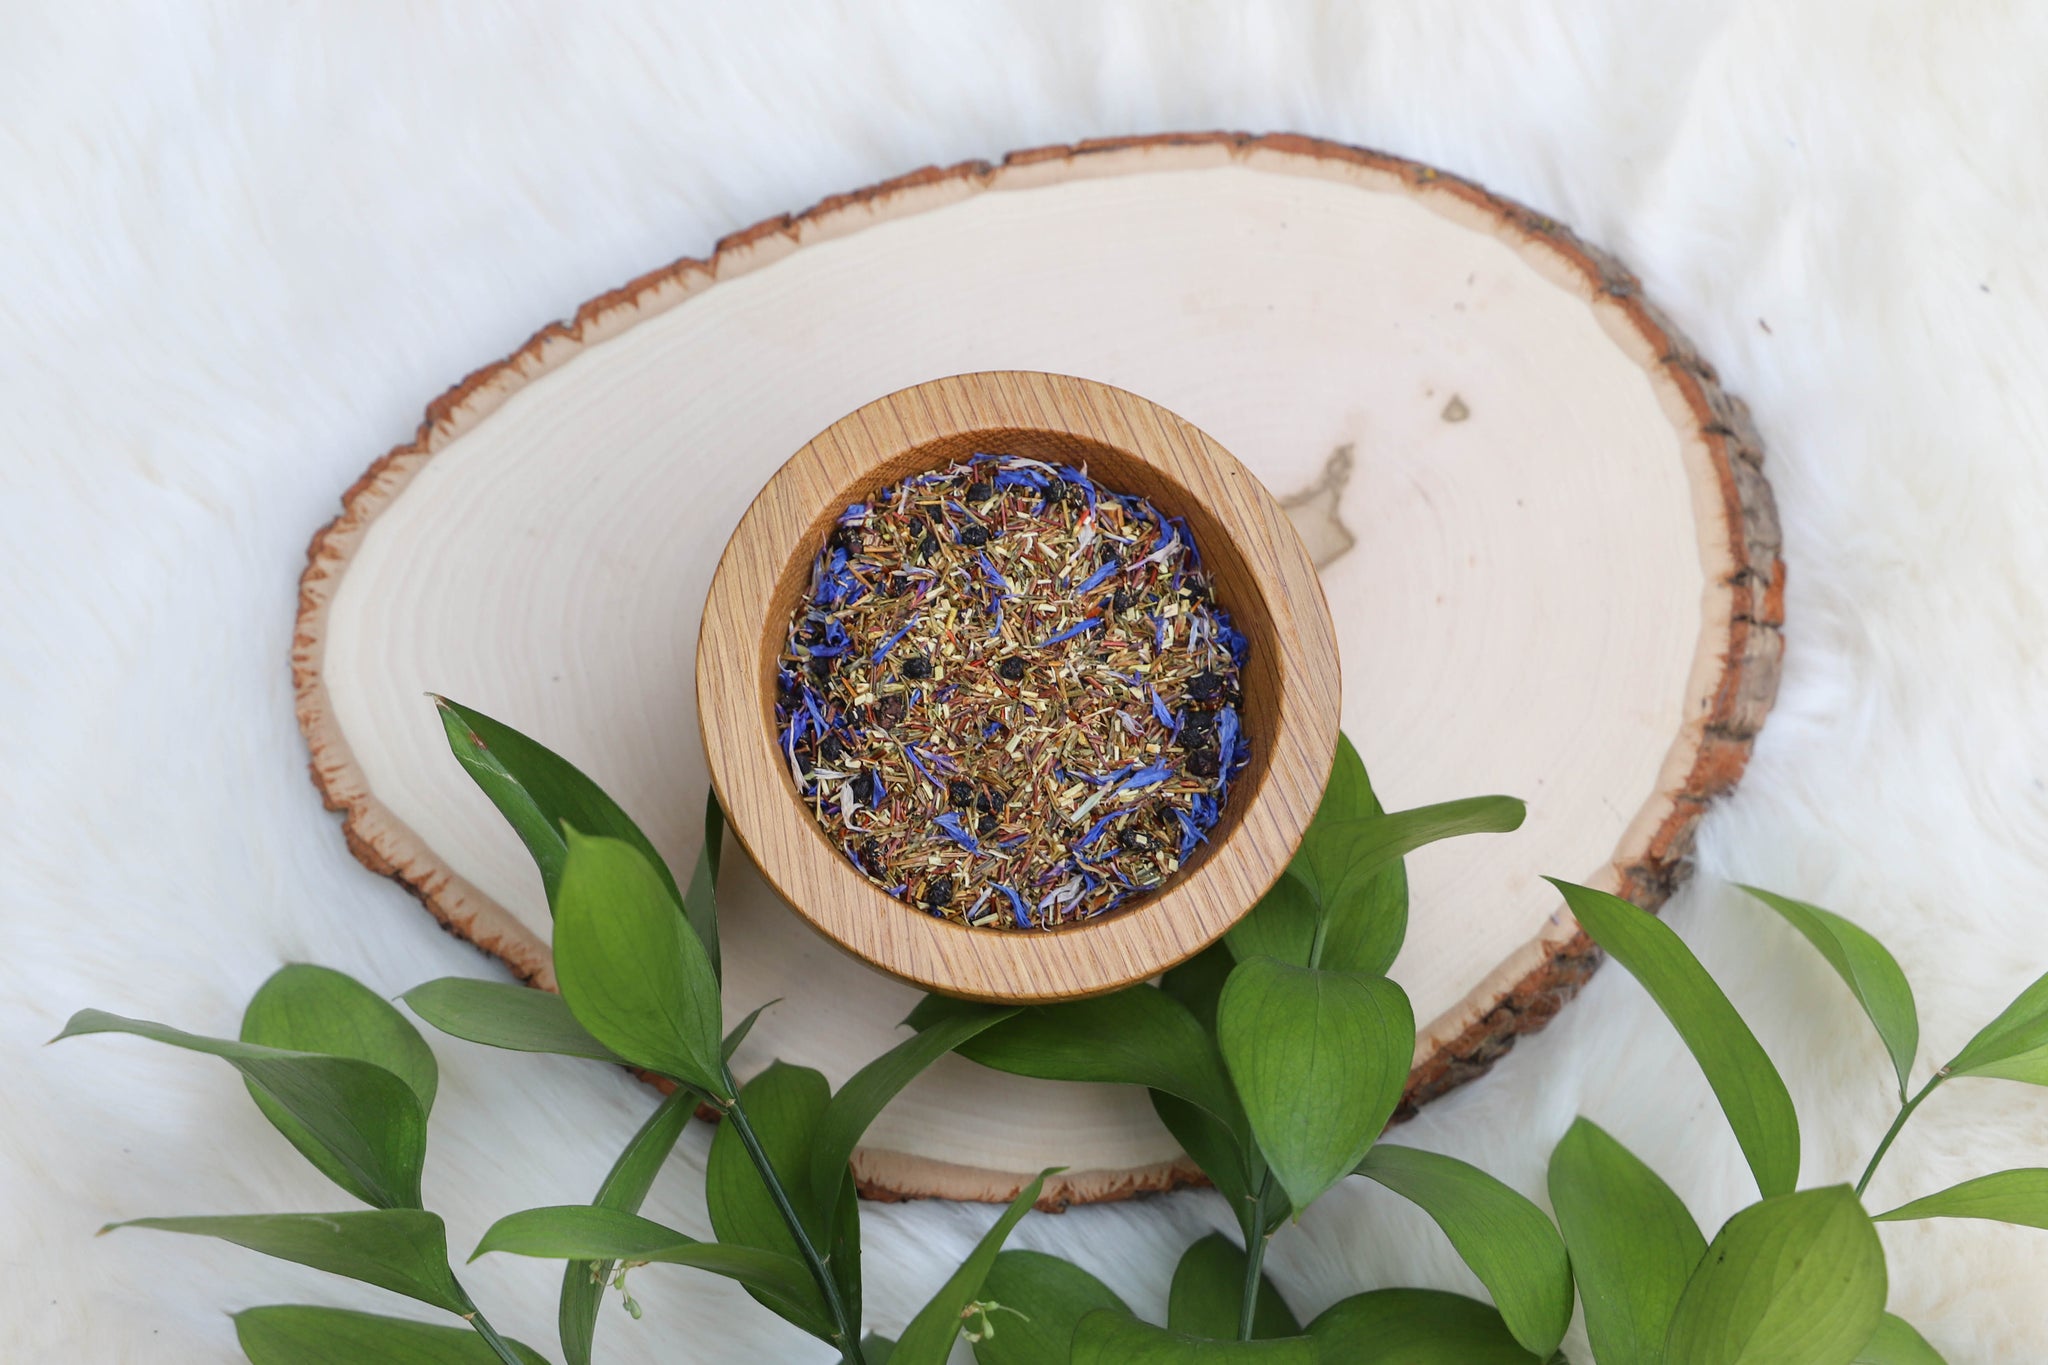 "Azriel" - Blueberry Muffin Herbal Tea - A Court of Mist and Fury inspired